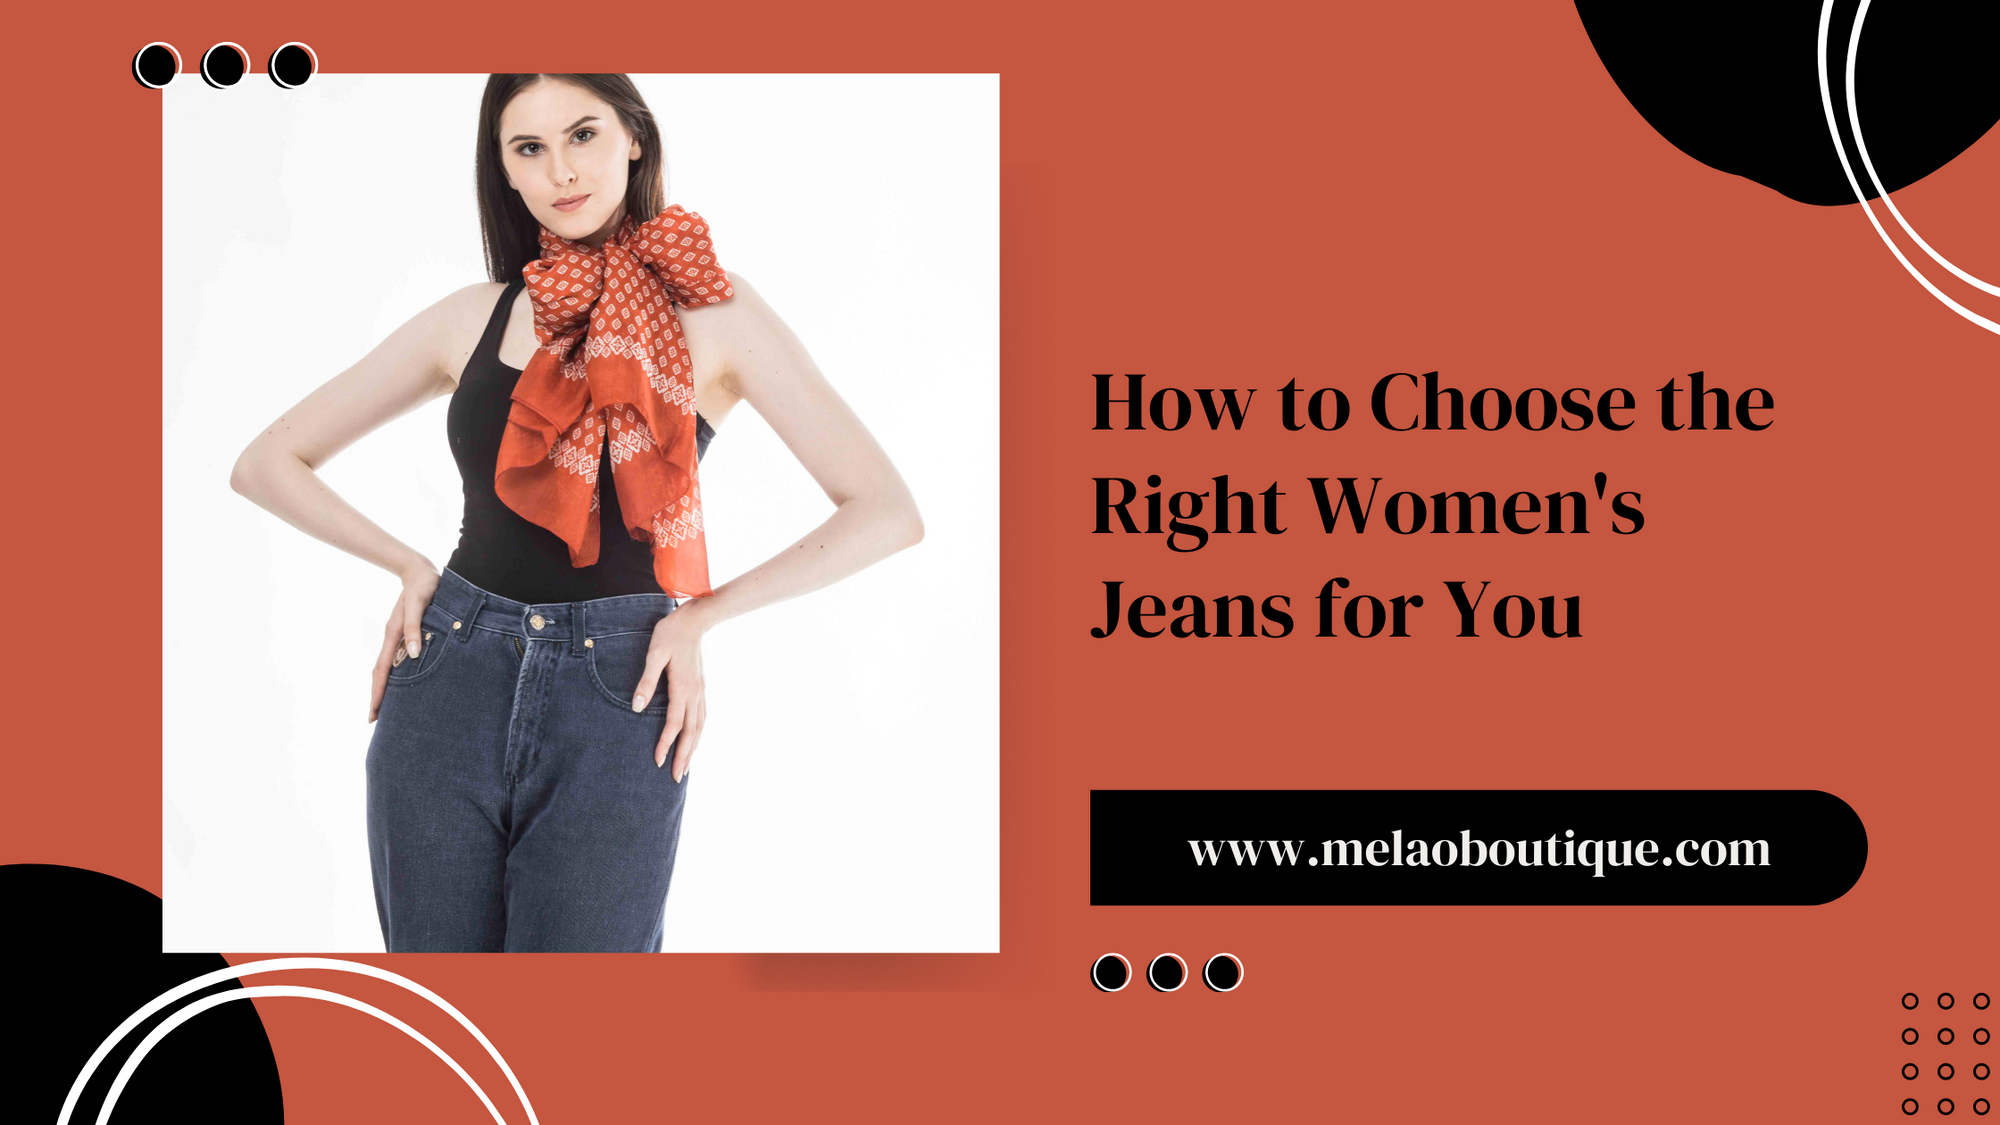 How to Choose the Right Women's Jeans for You